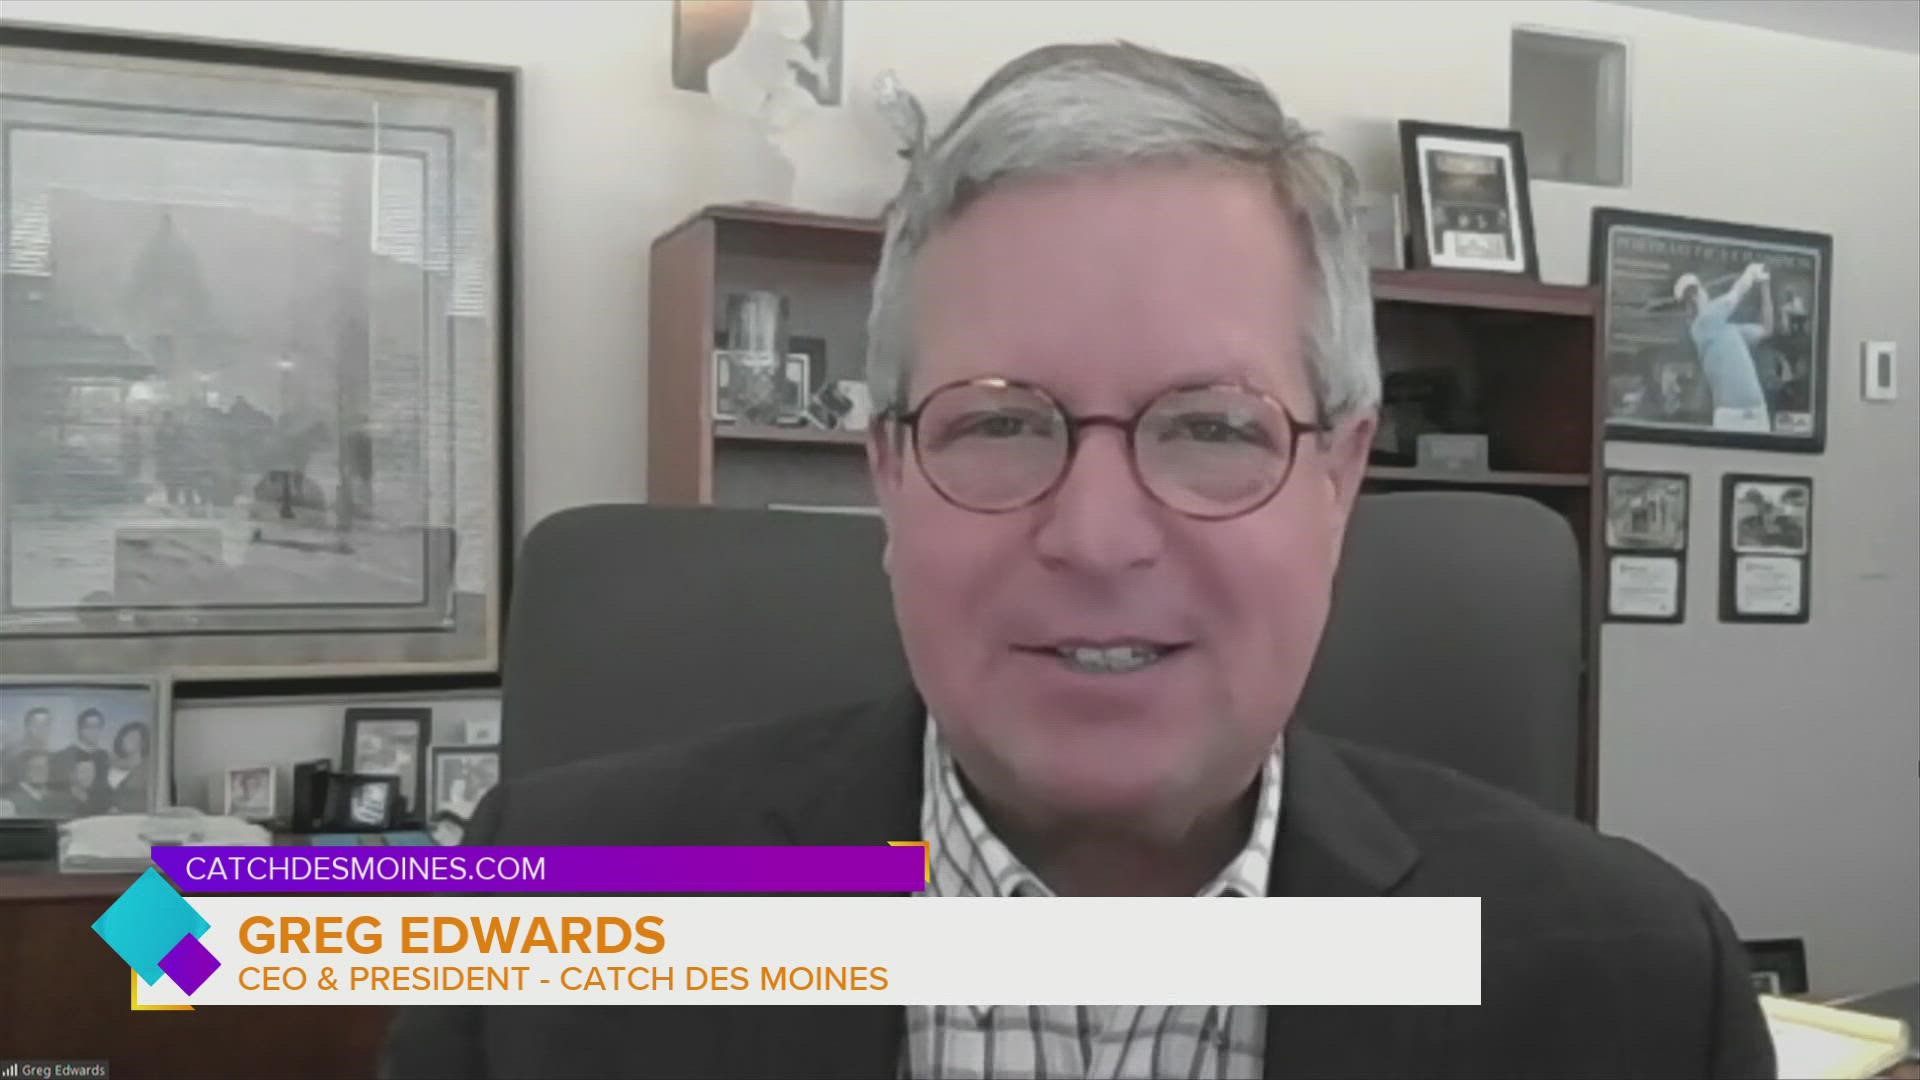 Greg Edwards, CEO/President-Catch Des Moines w/ great events to see and do in Central Iowa including amazing athletes, comic relief and FREE  to attend Flea Market!